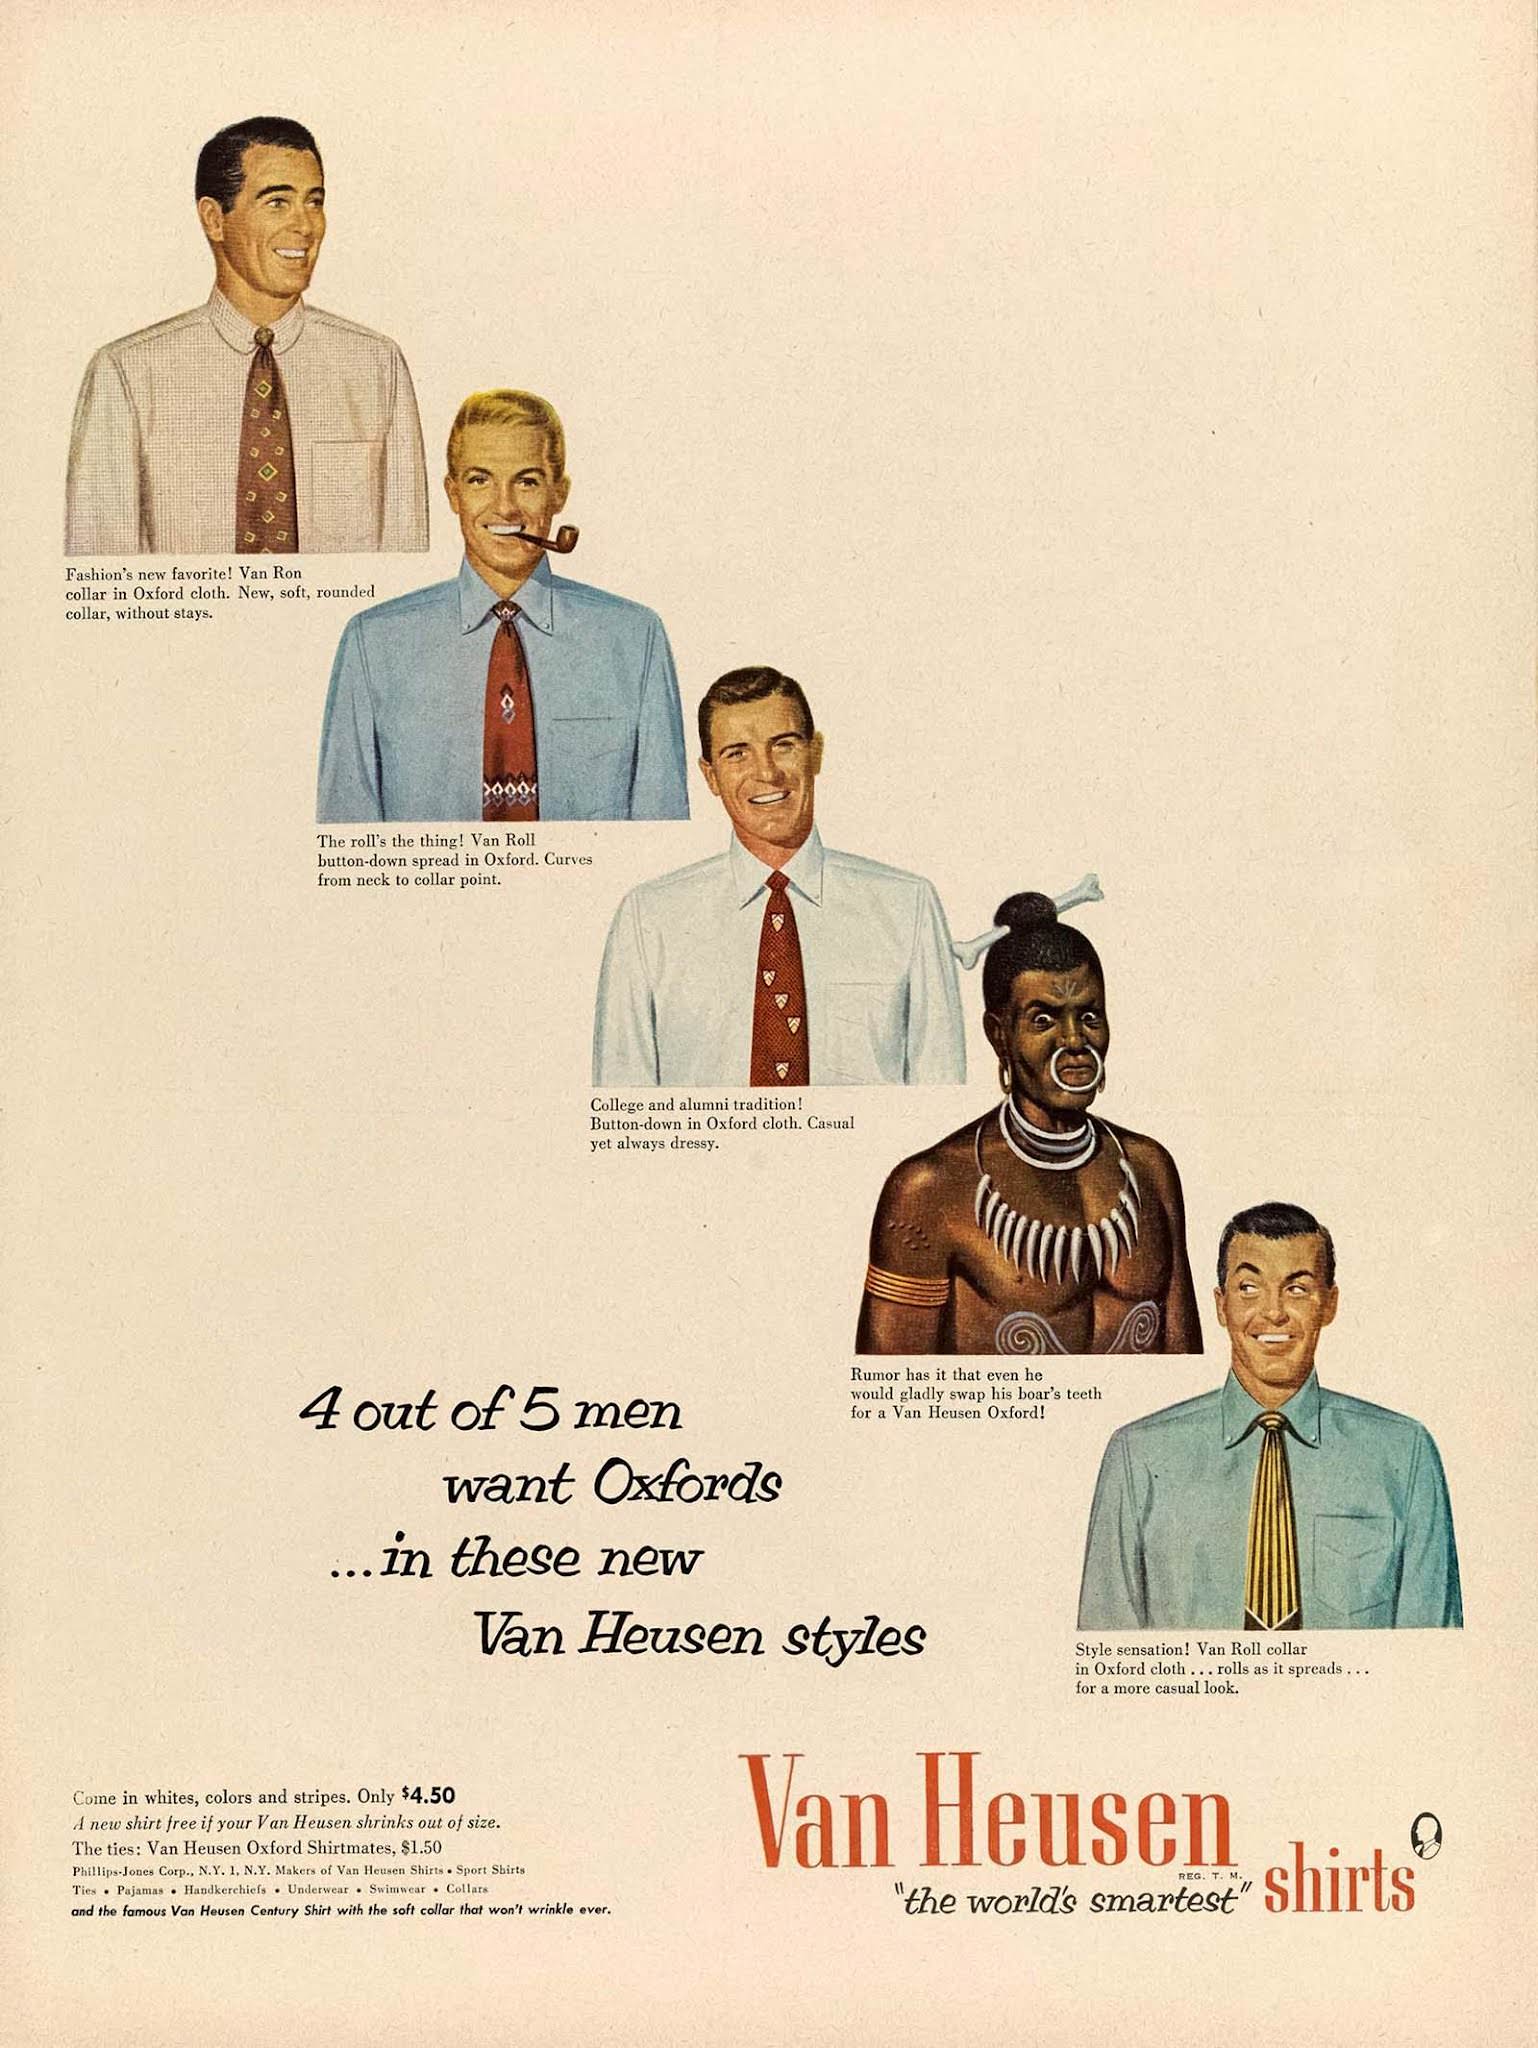 4 out of 5 men want Oxfords…in the new Van Heusen styles.